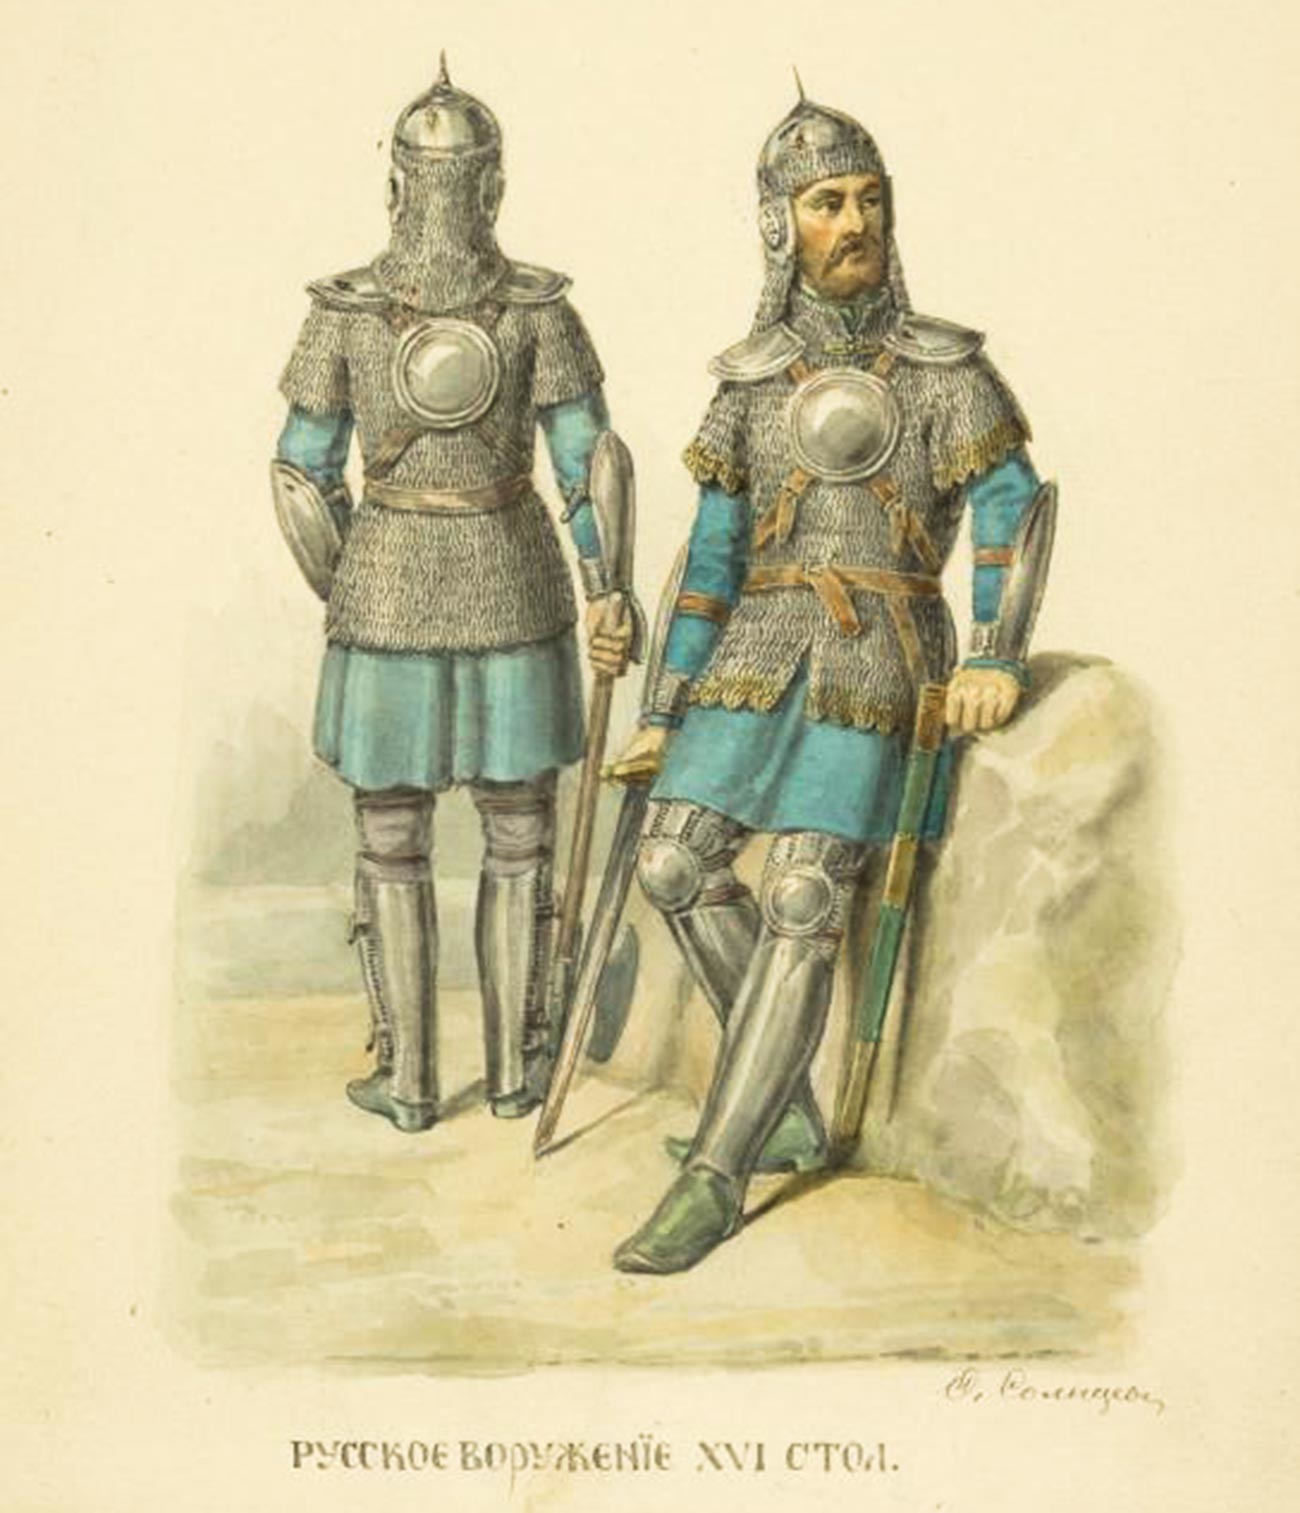 Fyodor Solntsev's reconstruction of the Russian infantry of the 16th century